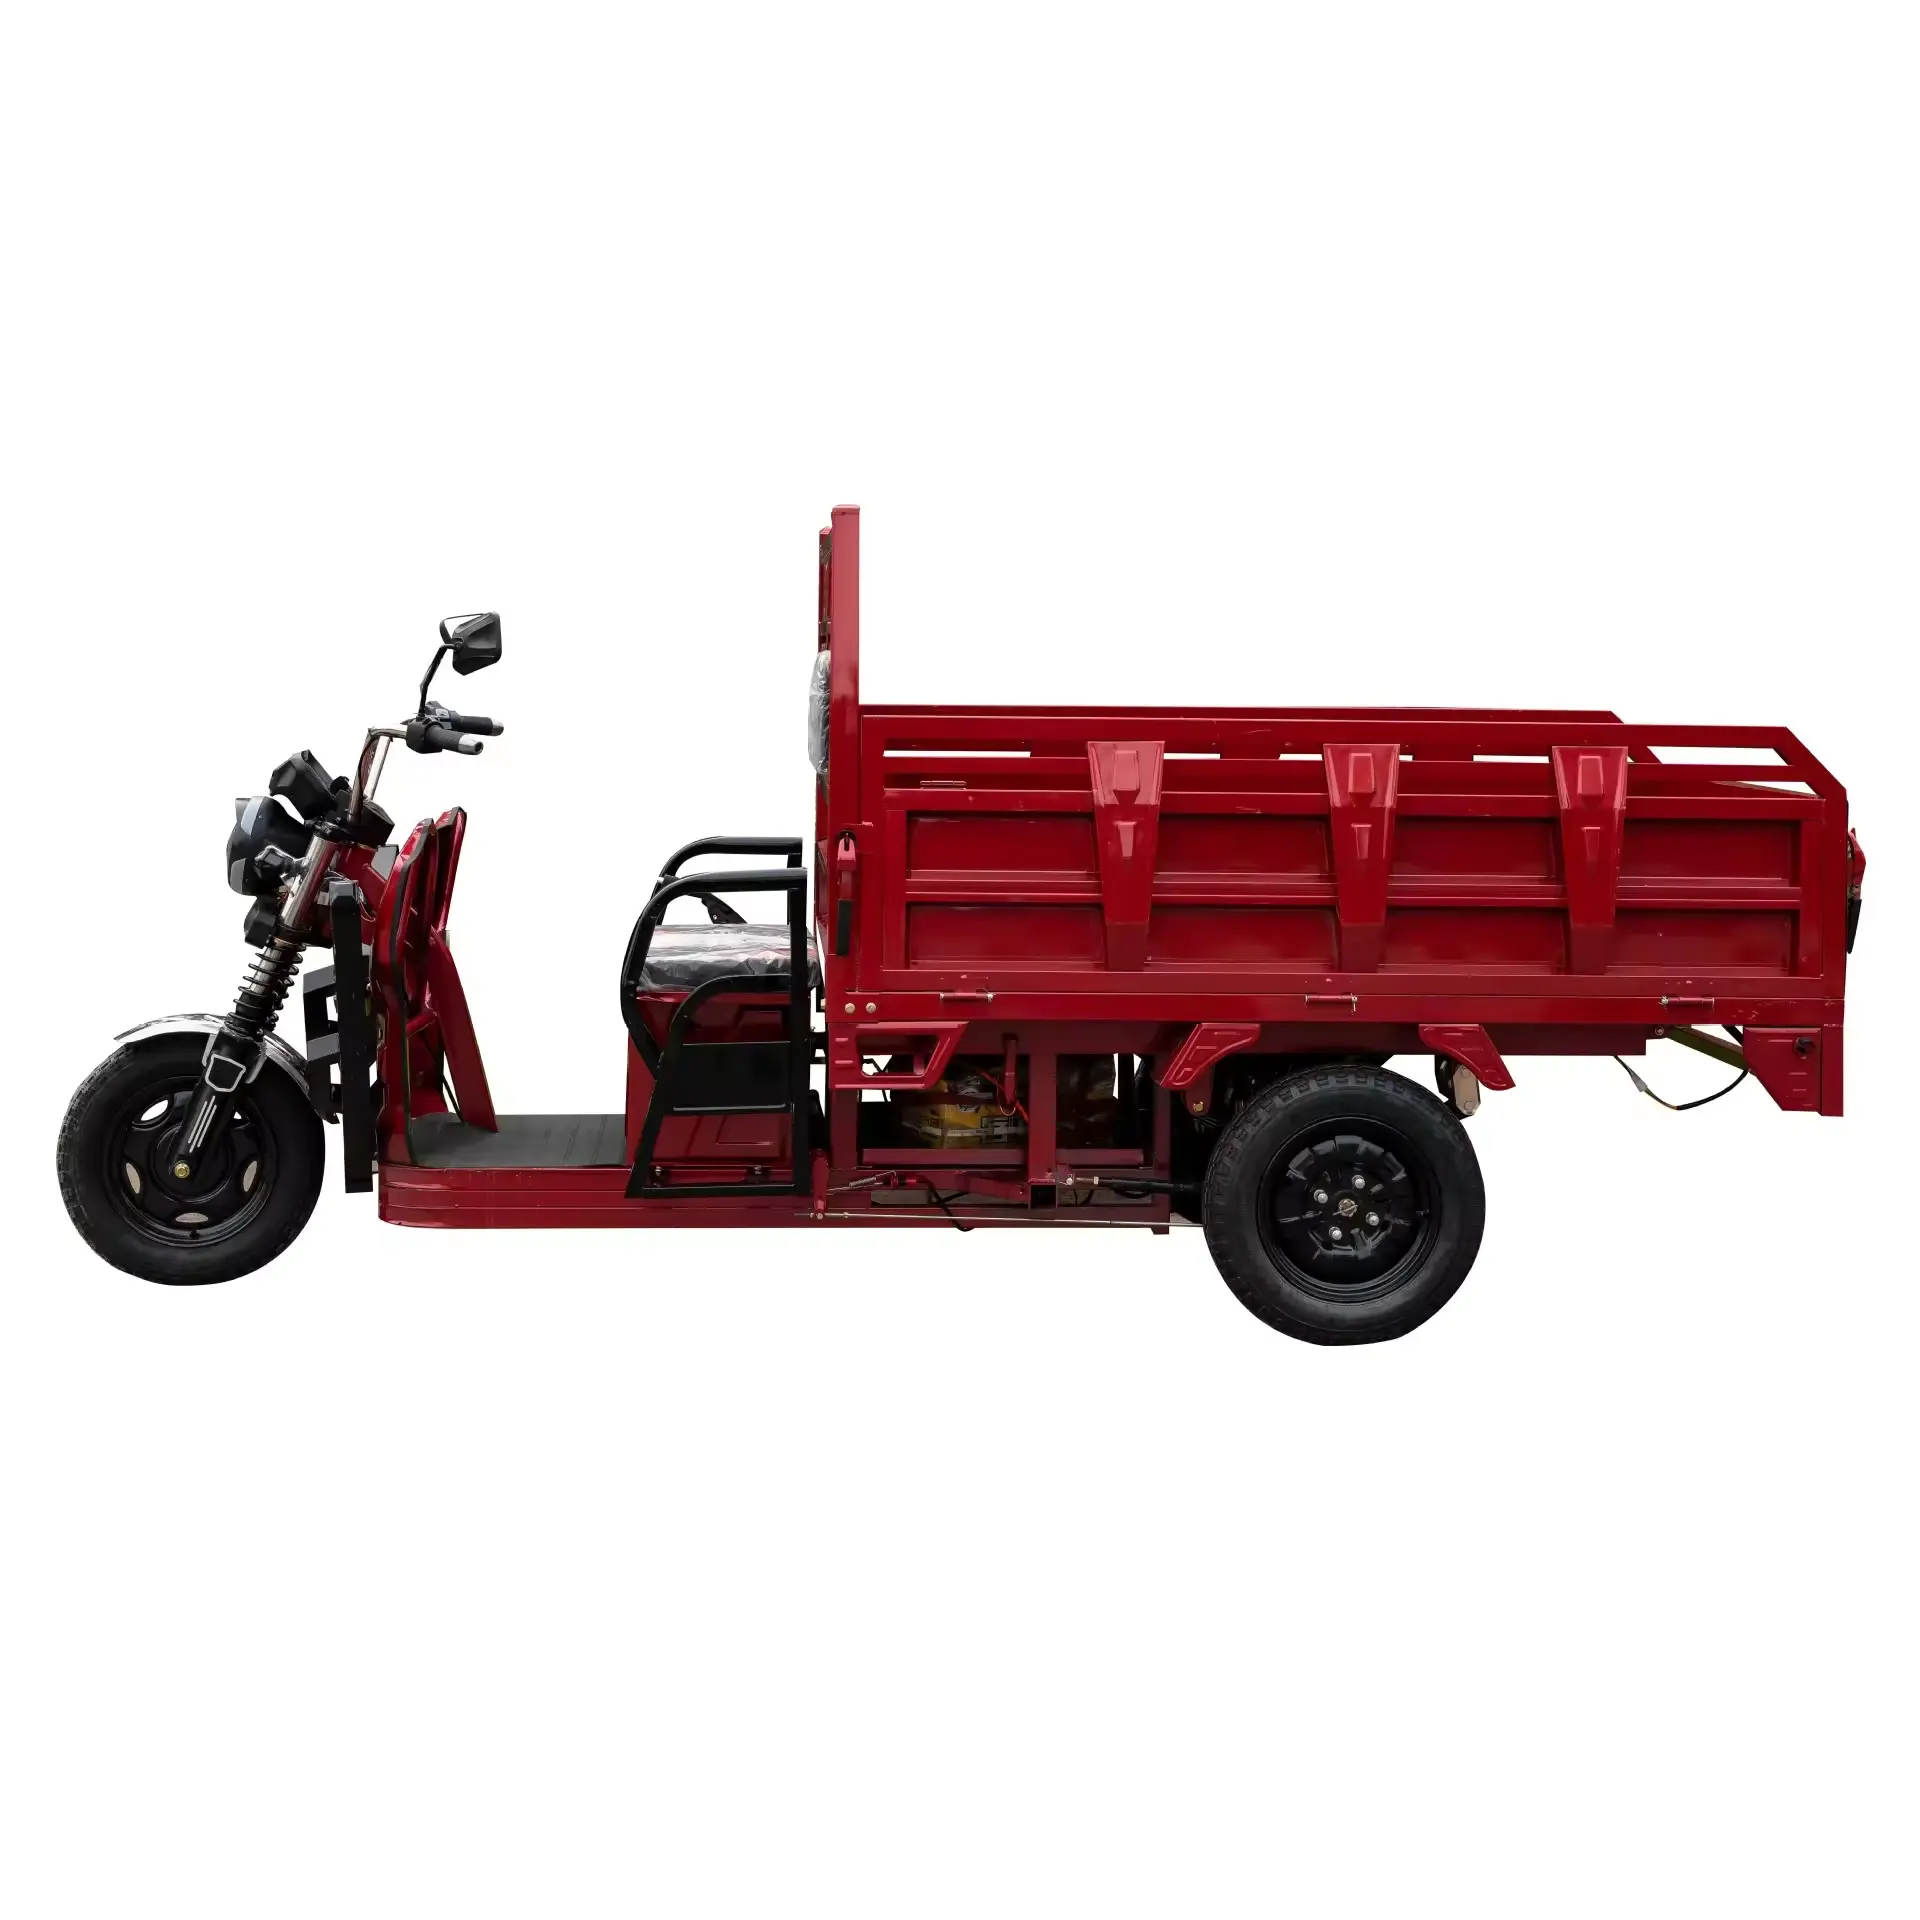 3 wheel electric bike rickshaw 3 wheel electric cargo delivery scooter tricycle 3 wheel motorcycle